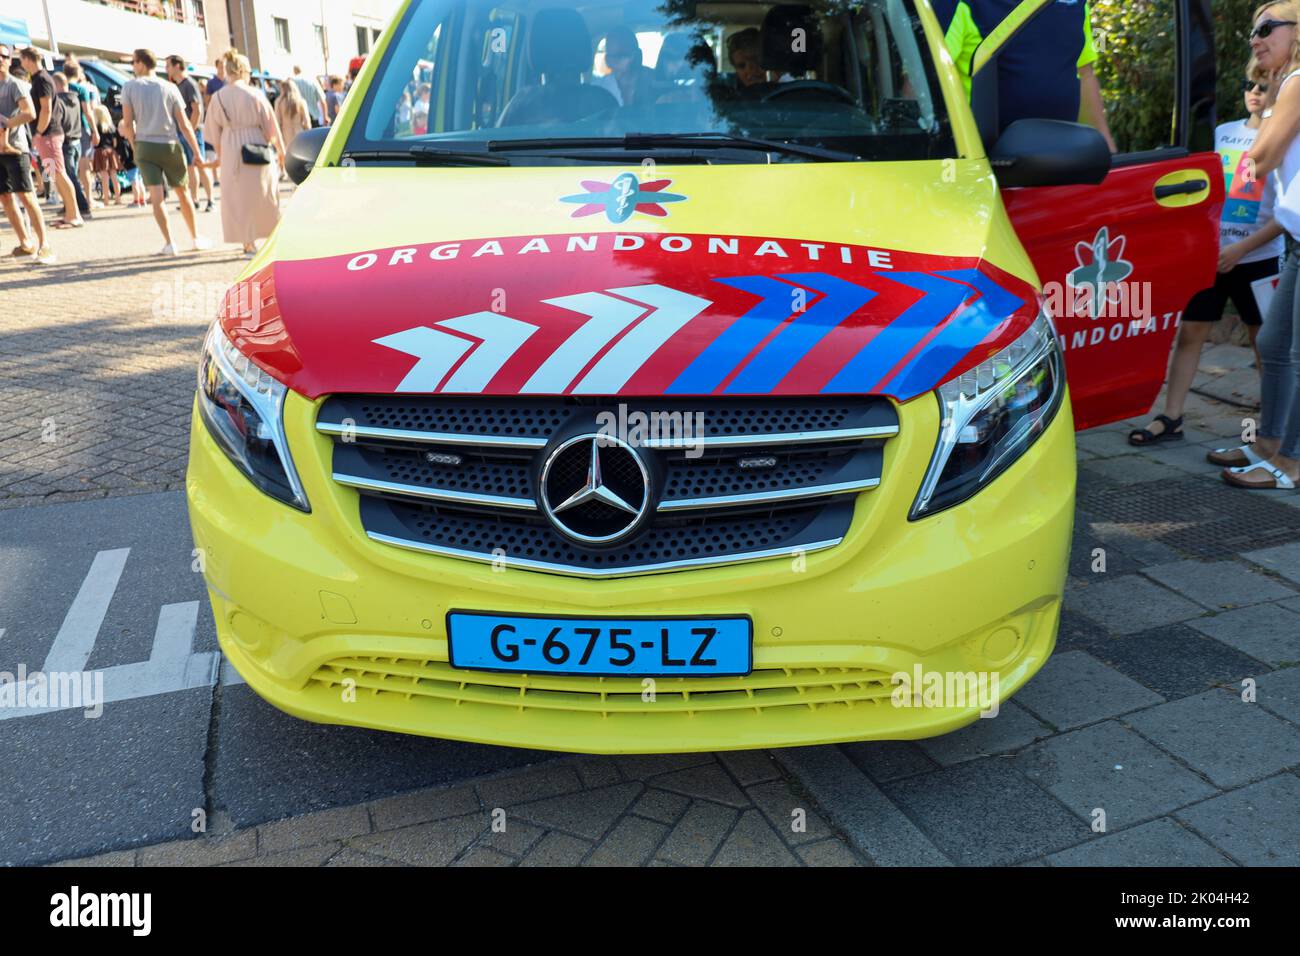 urgent van for usage of organ donation arts or organs transport in the Netherlands Stock Photo